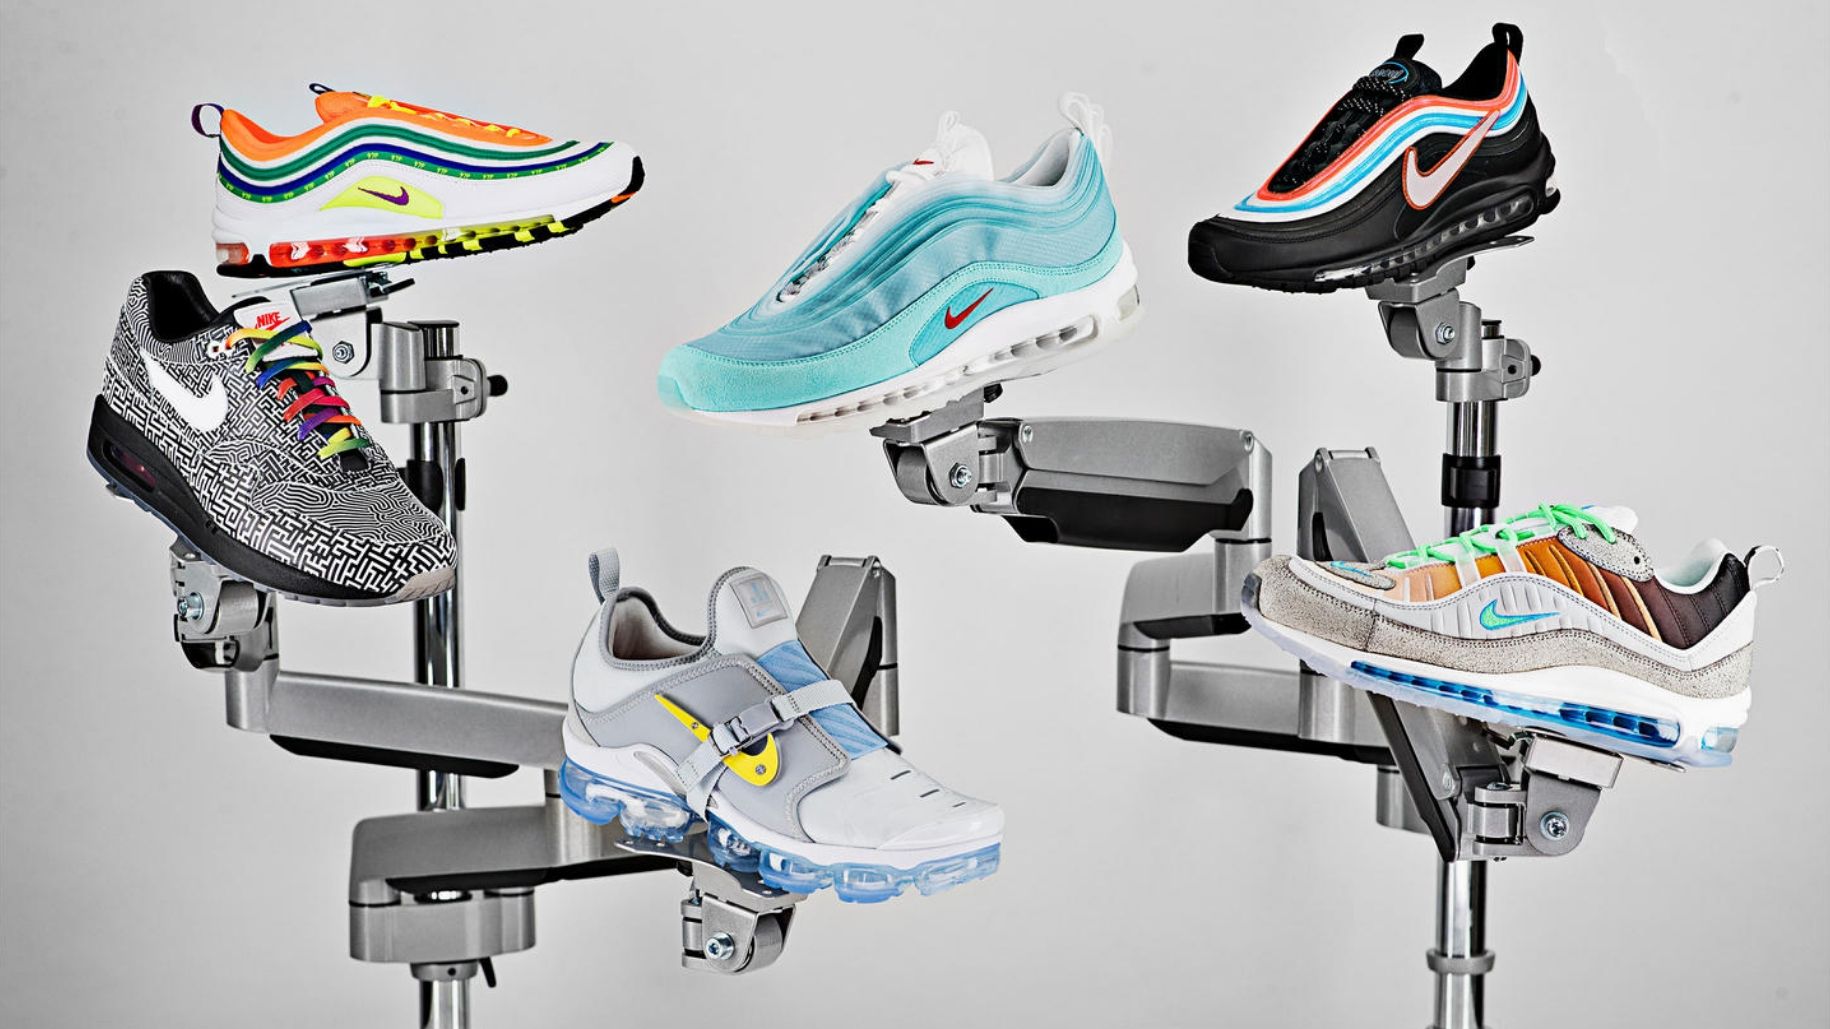 the final 6 air max shoes displayed together on metal arms